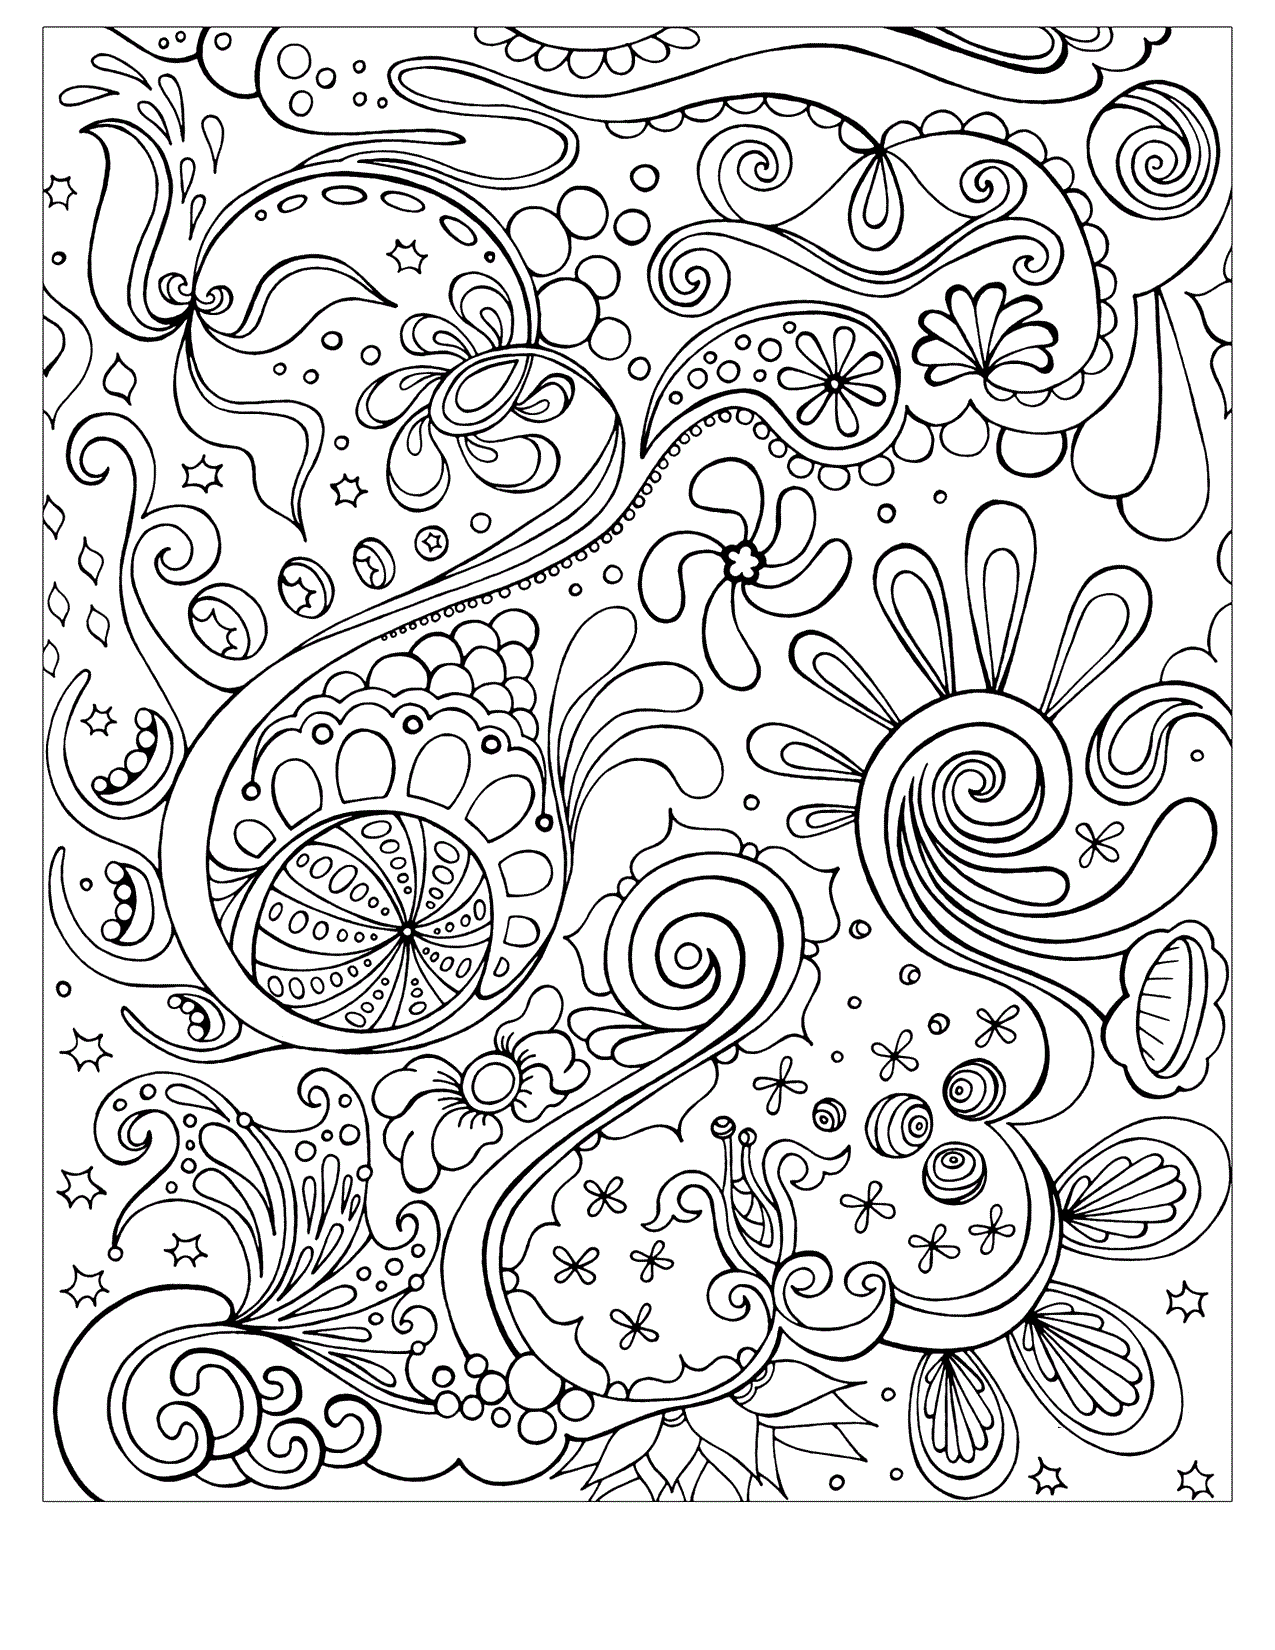 Complicated - Coloring Pages for Kids and for Adults